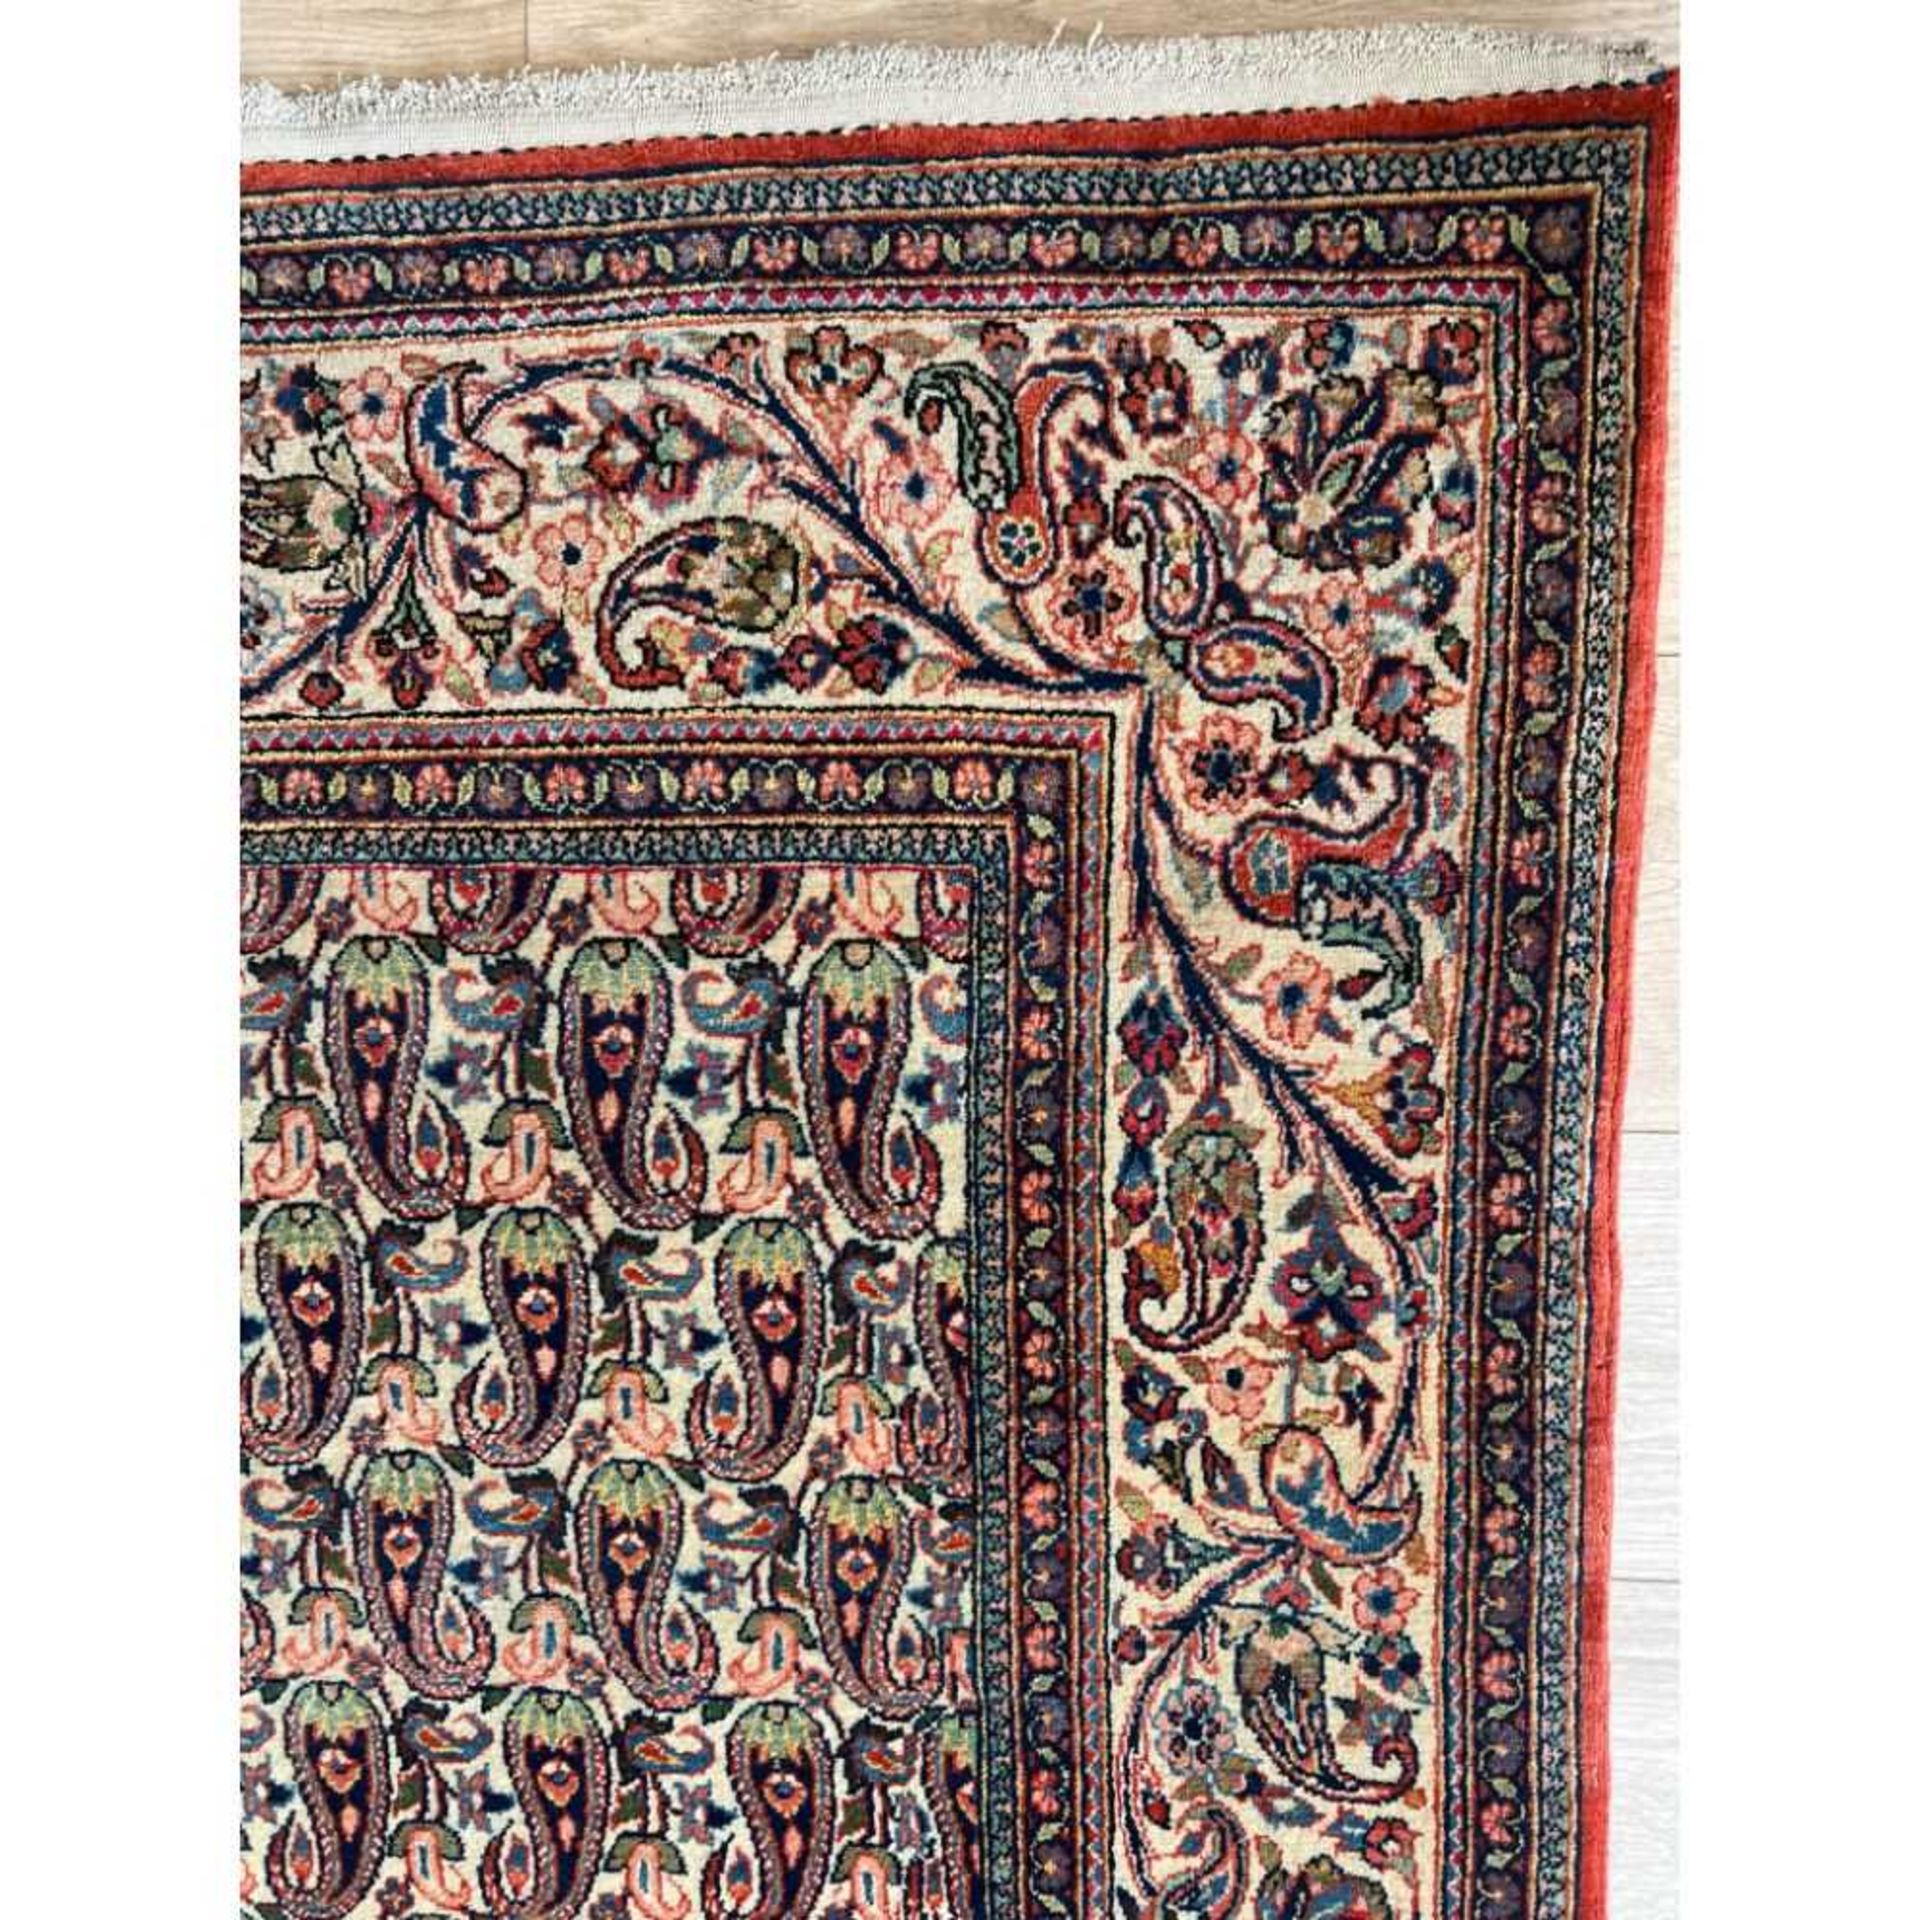 A MID 20TH CENTURY KASHAN CARPET - Image 5 of 6